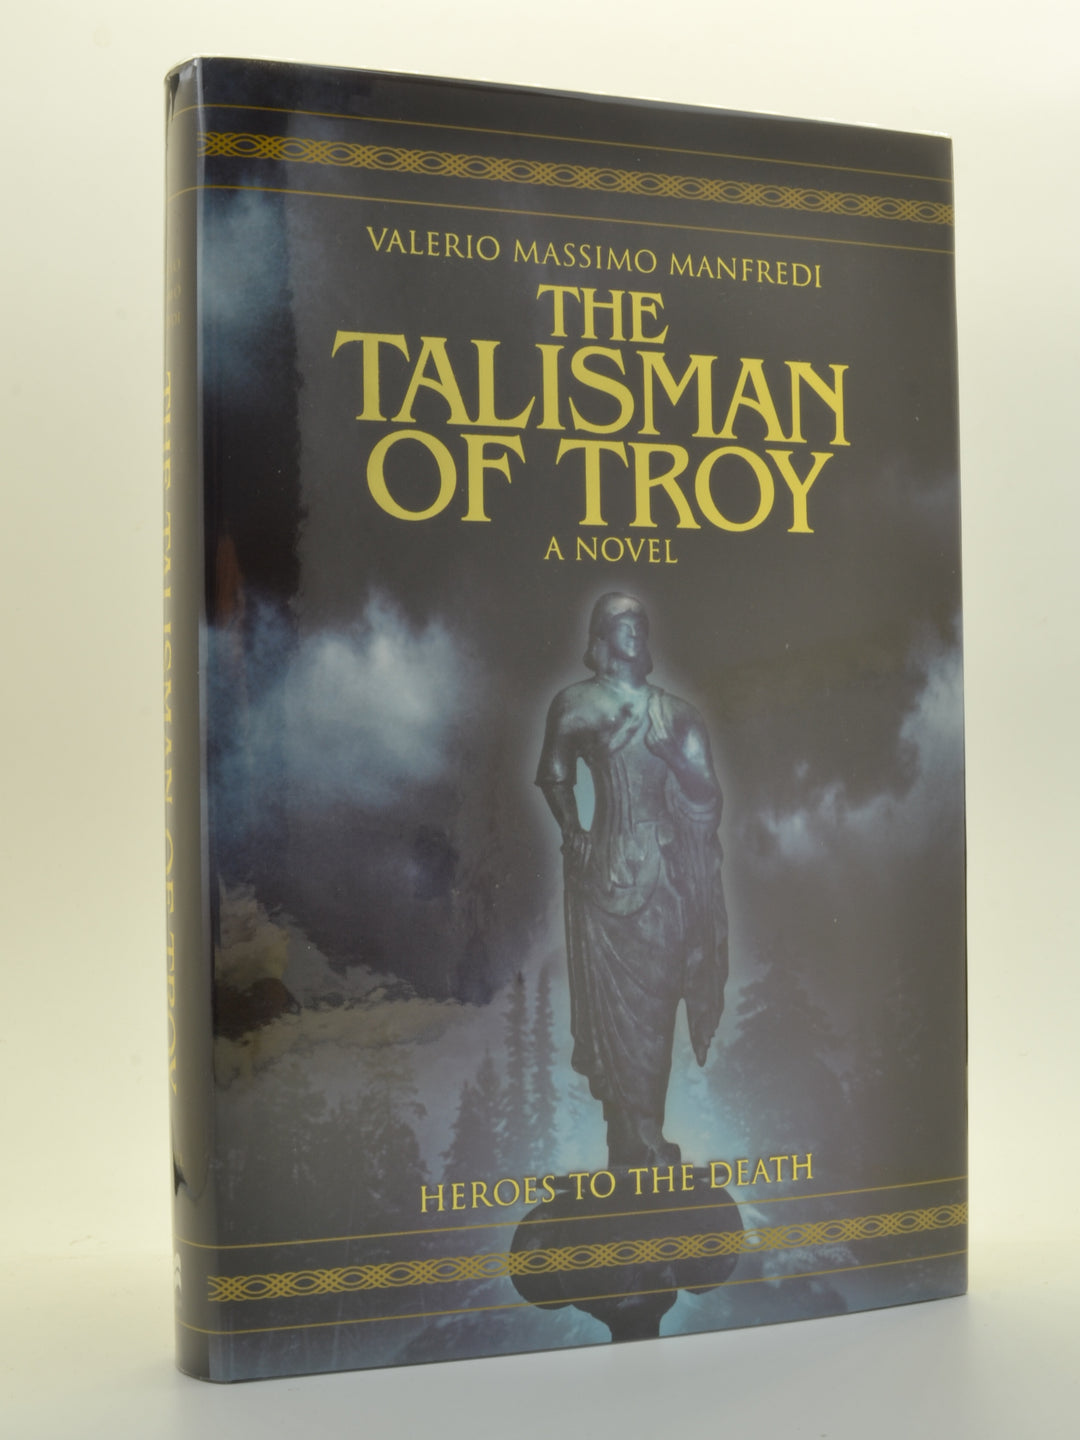 Manfredi, Valerio Massimo - The Talisman of Troy | front cover